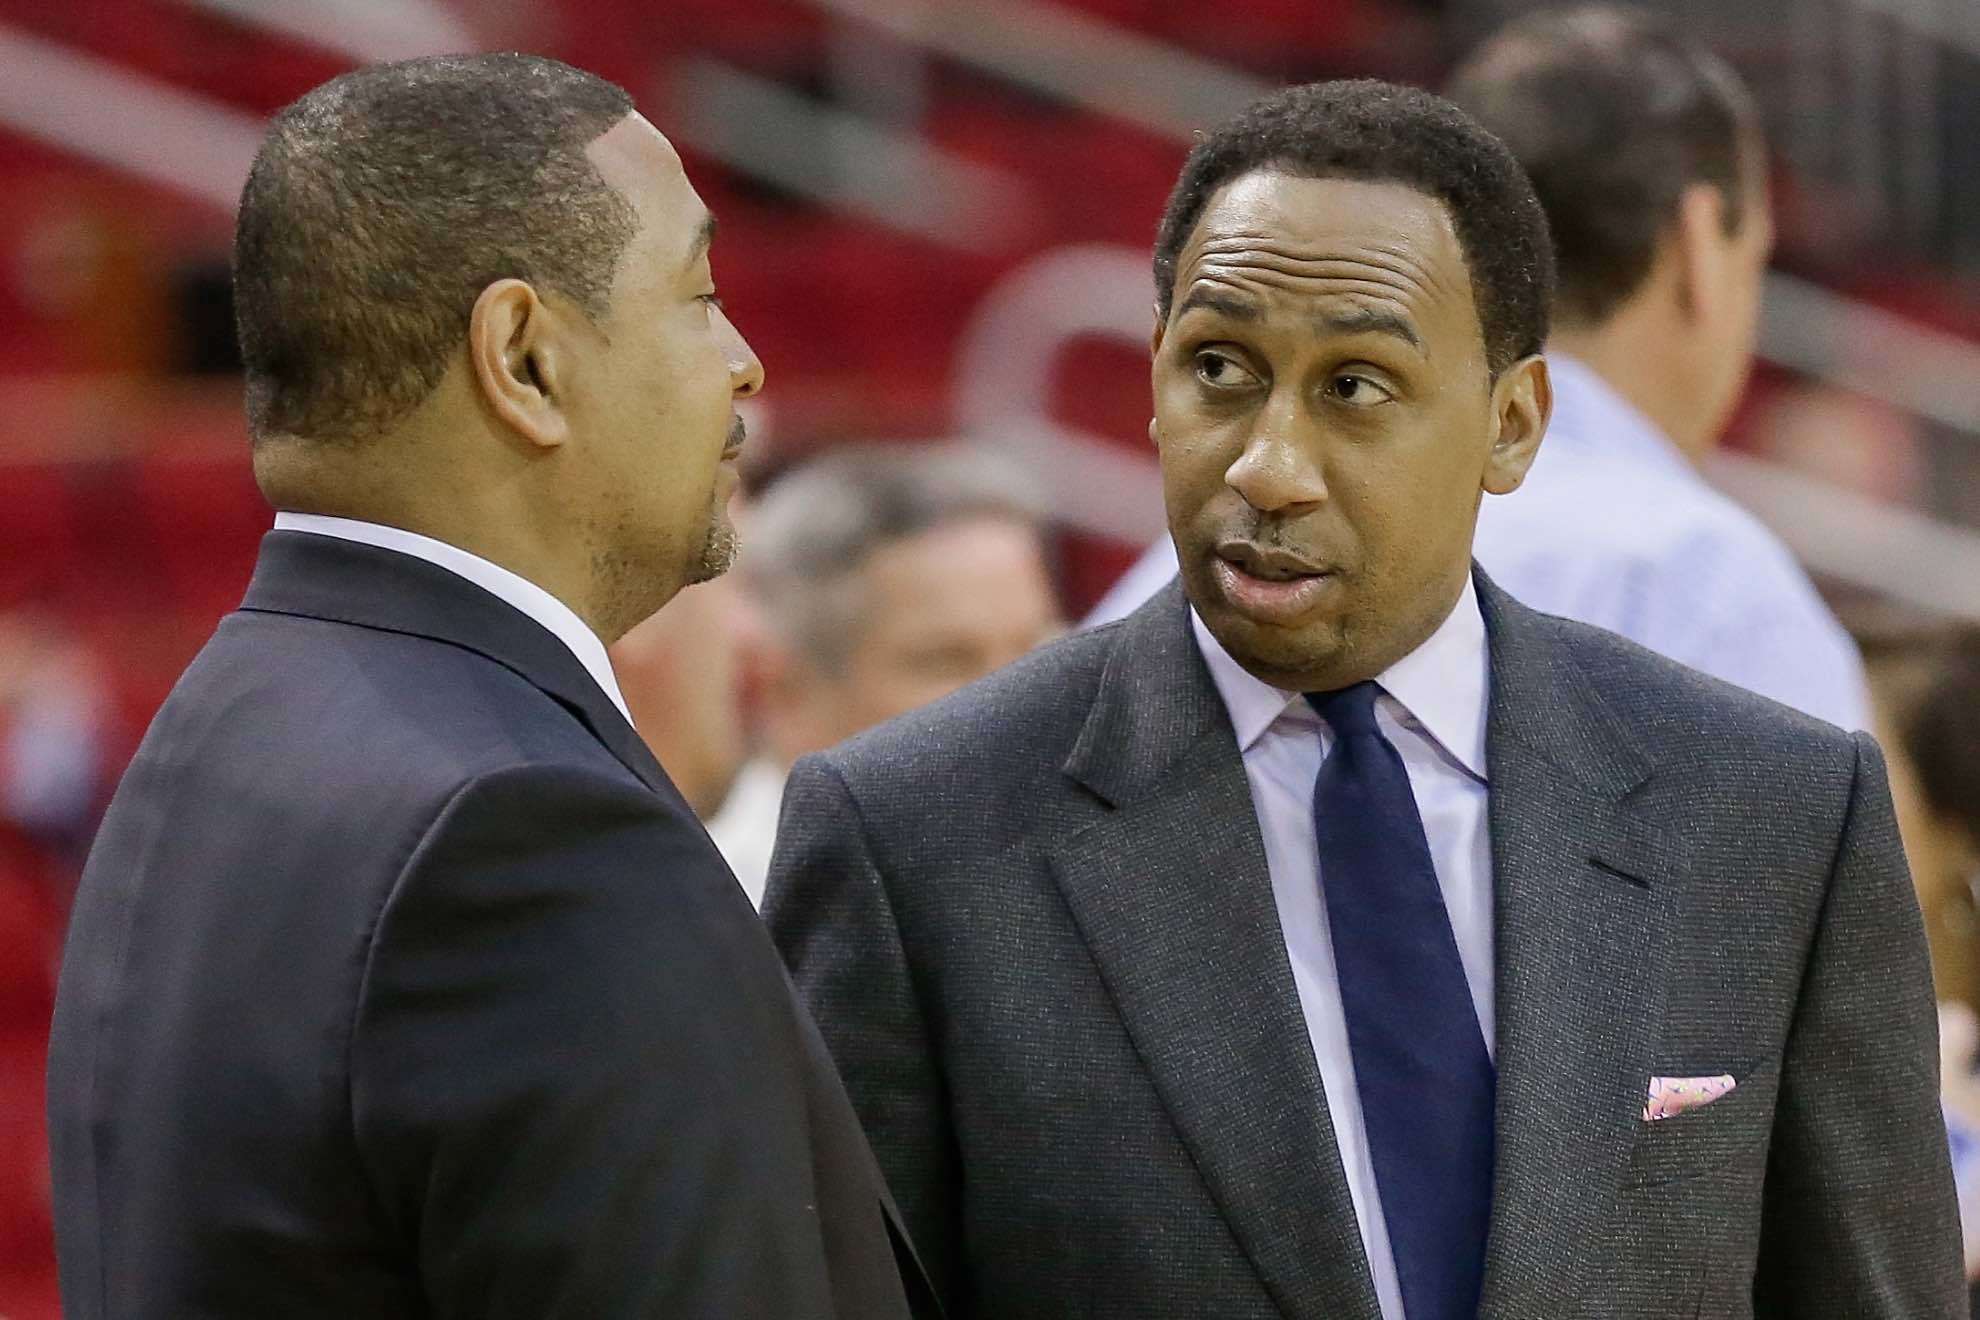 Stephen A. Smith shared his incredible body transformation on Instagram